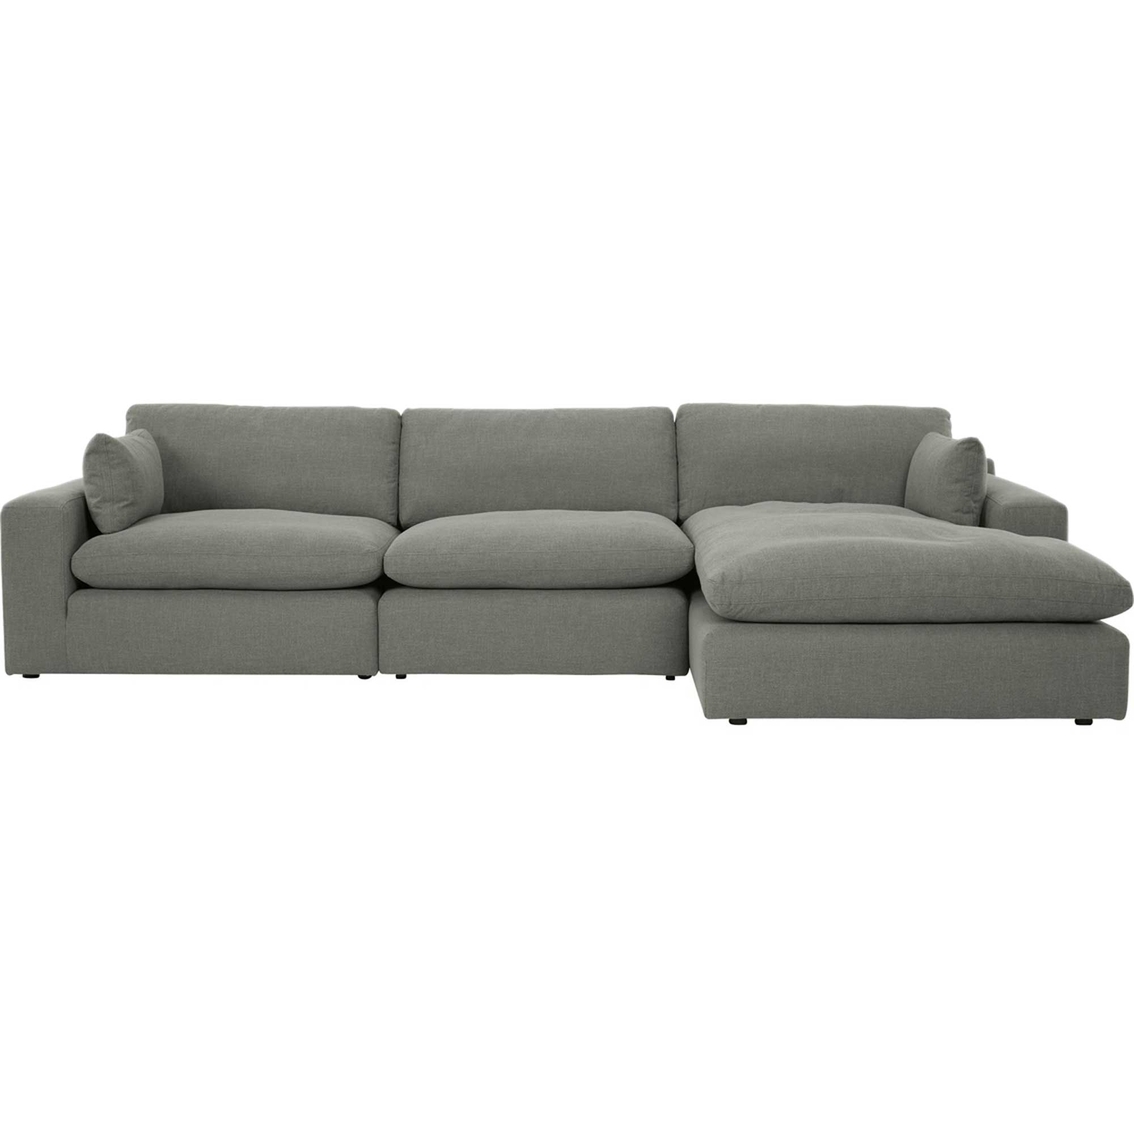 Millennium by Ashley Elyza 3 pc. Sectional with Chaise - Image 1 of 4